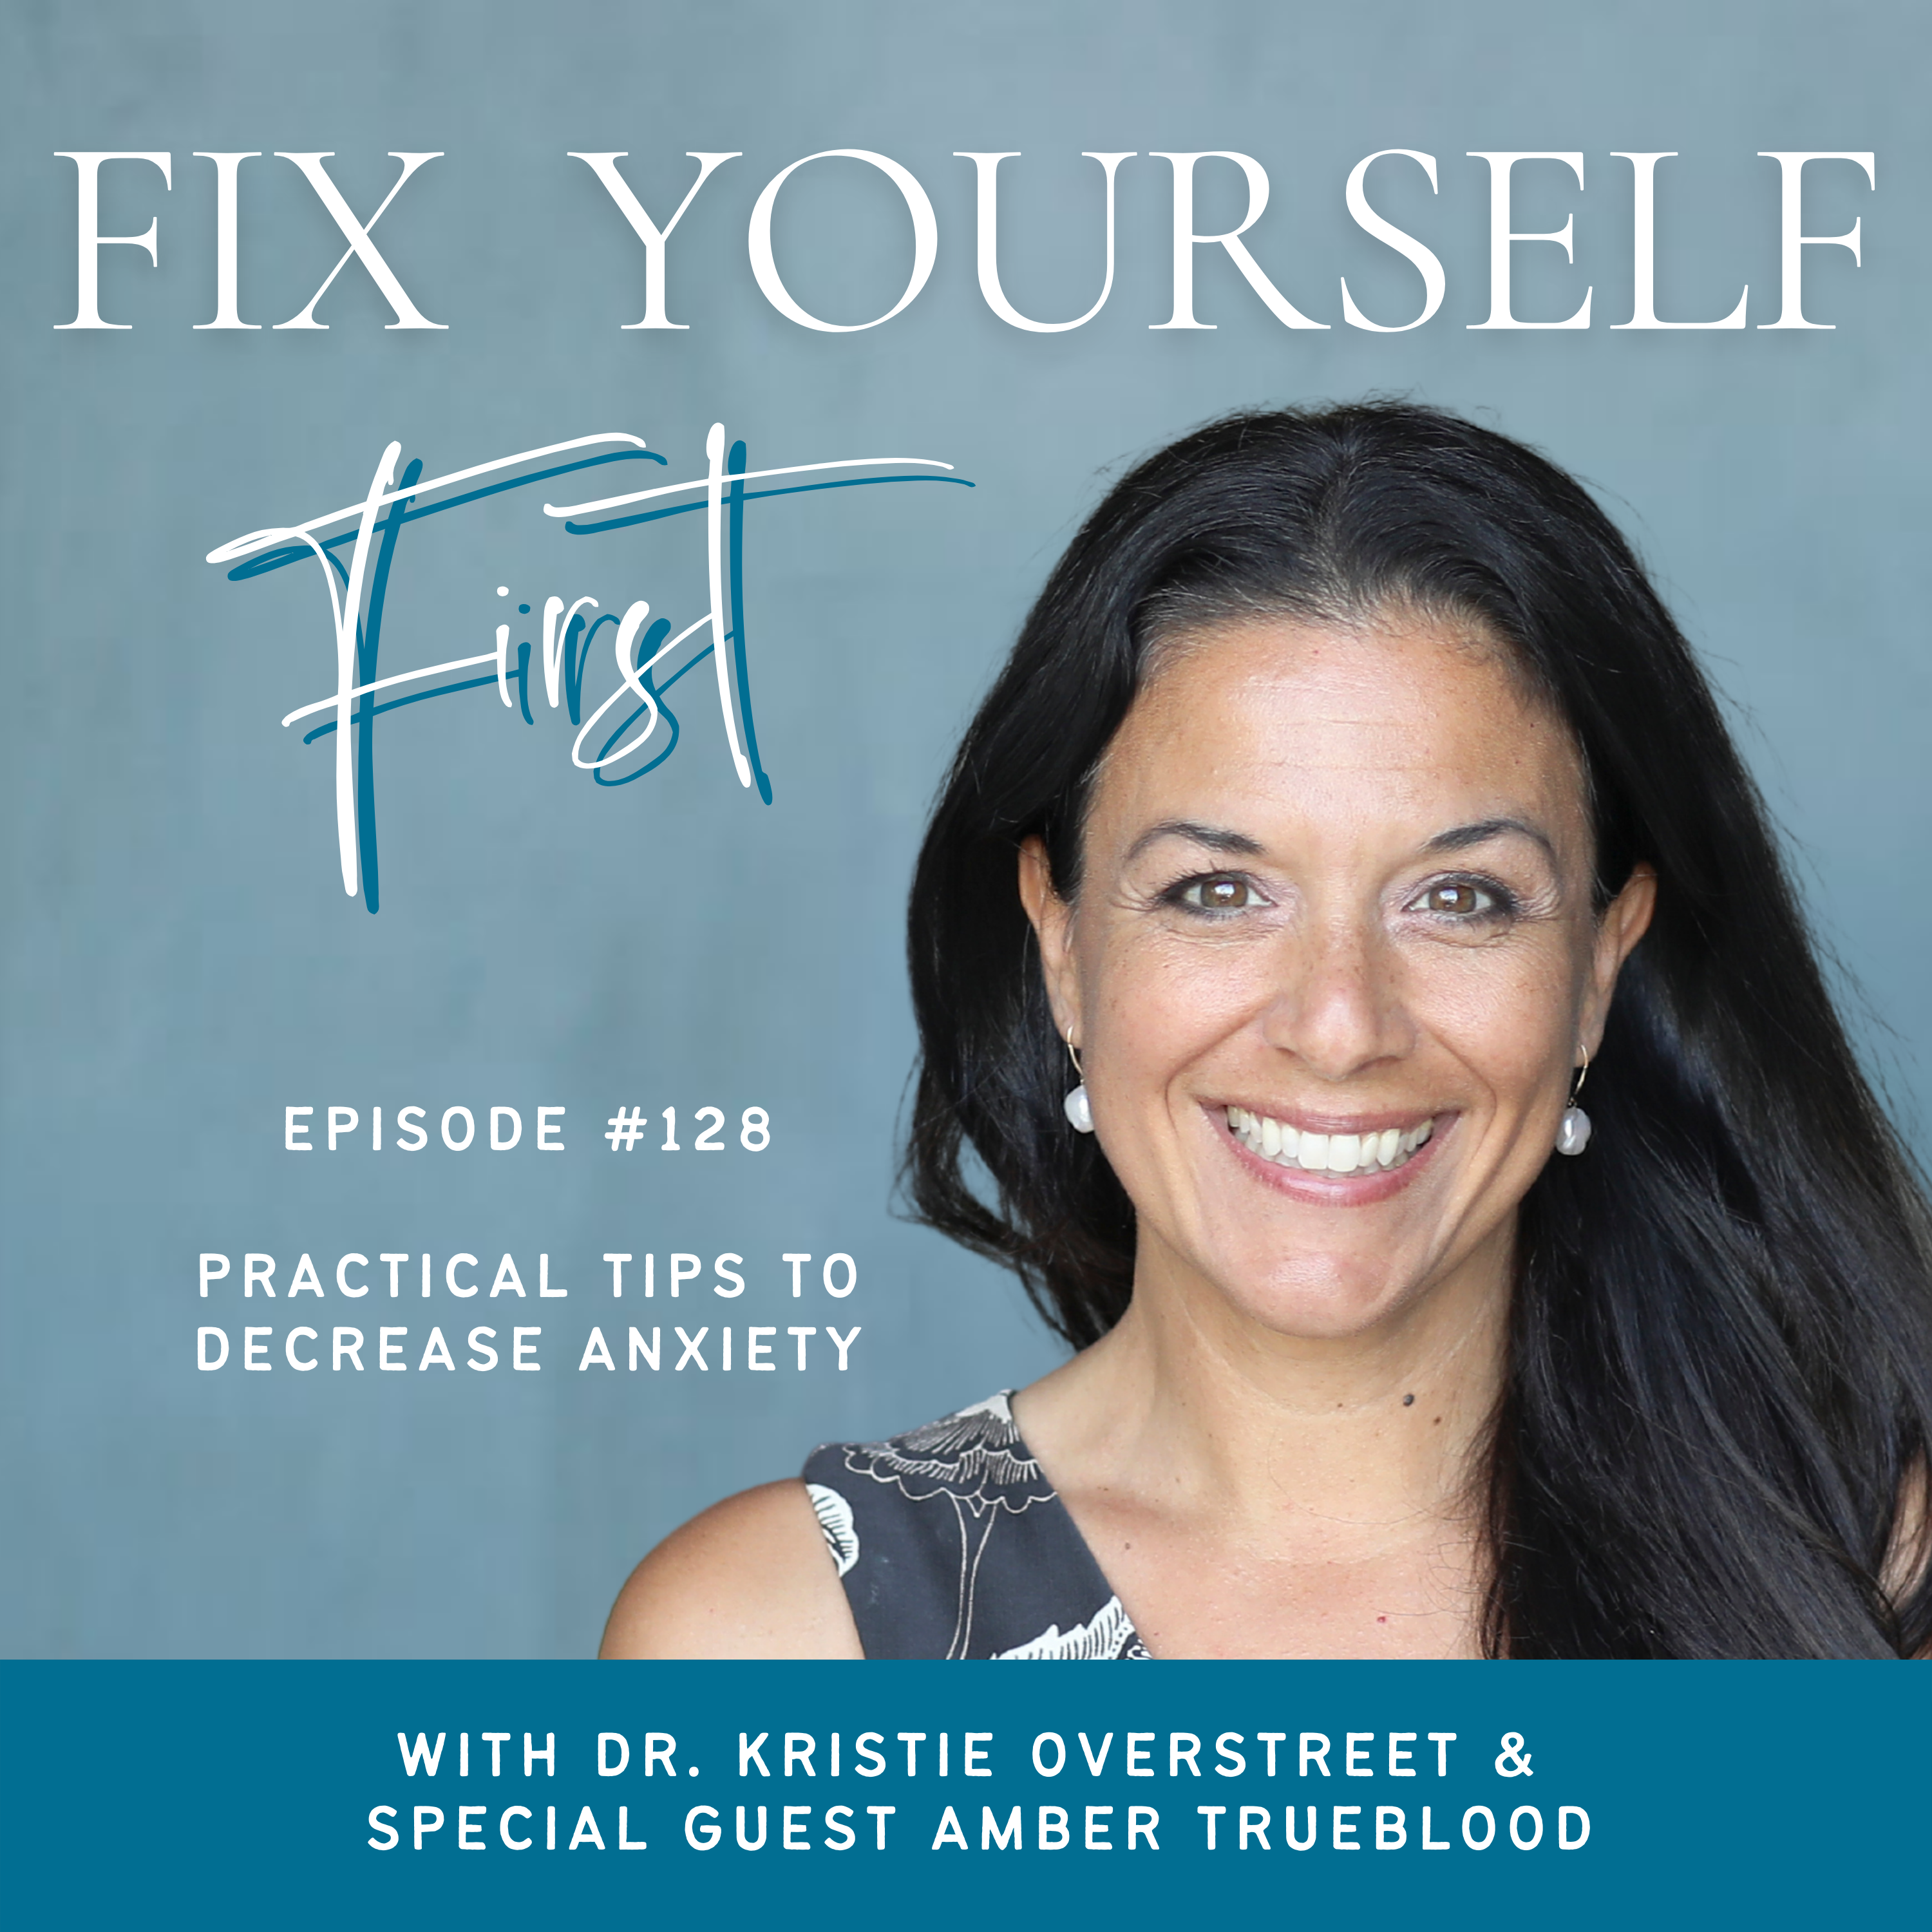 Fix Yourself First Episode 128 Practical Tips to Decrease Anxiety with Amber Trueblood